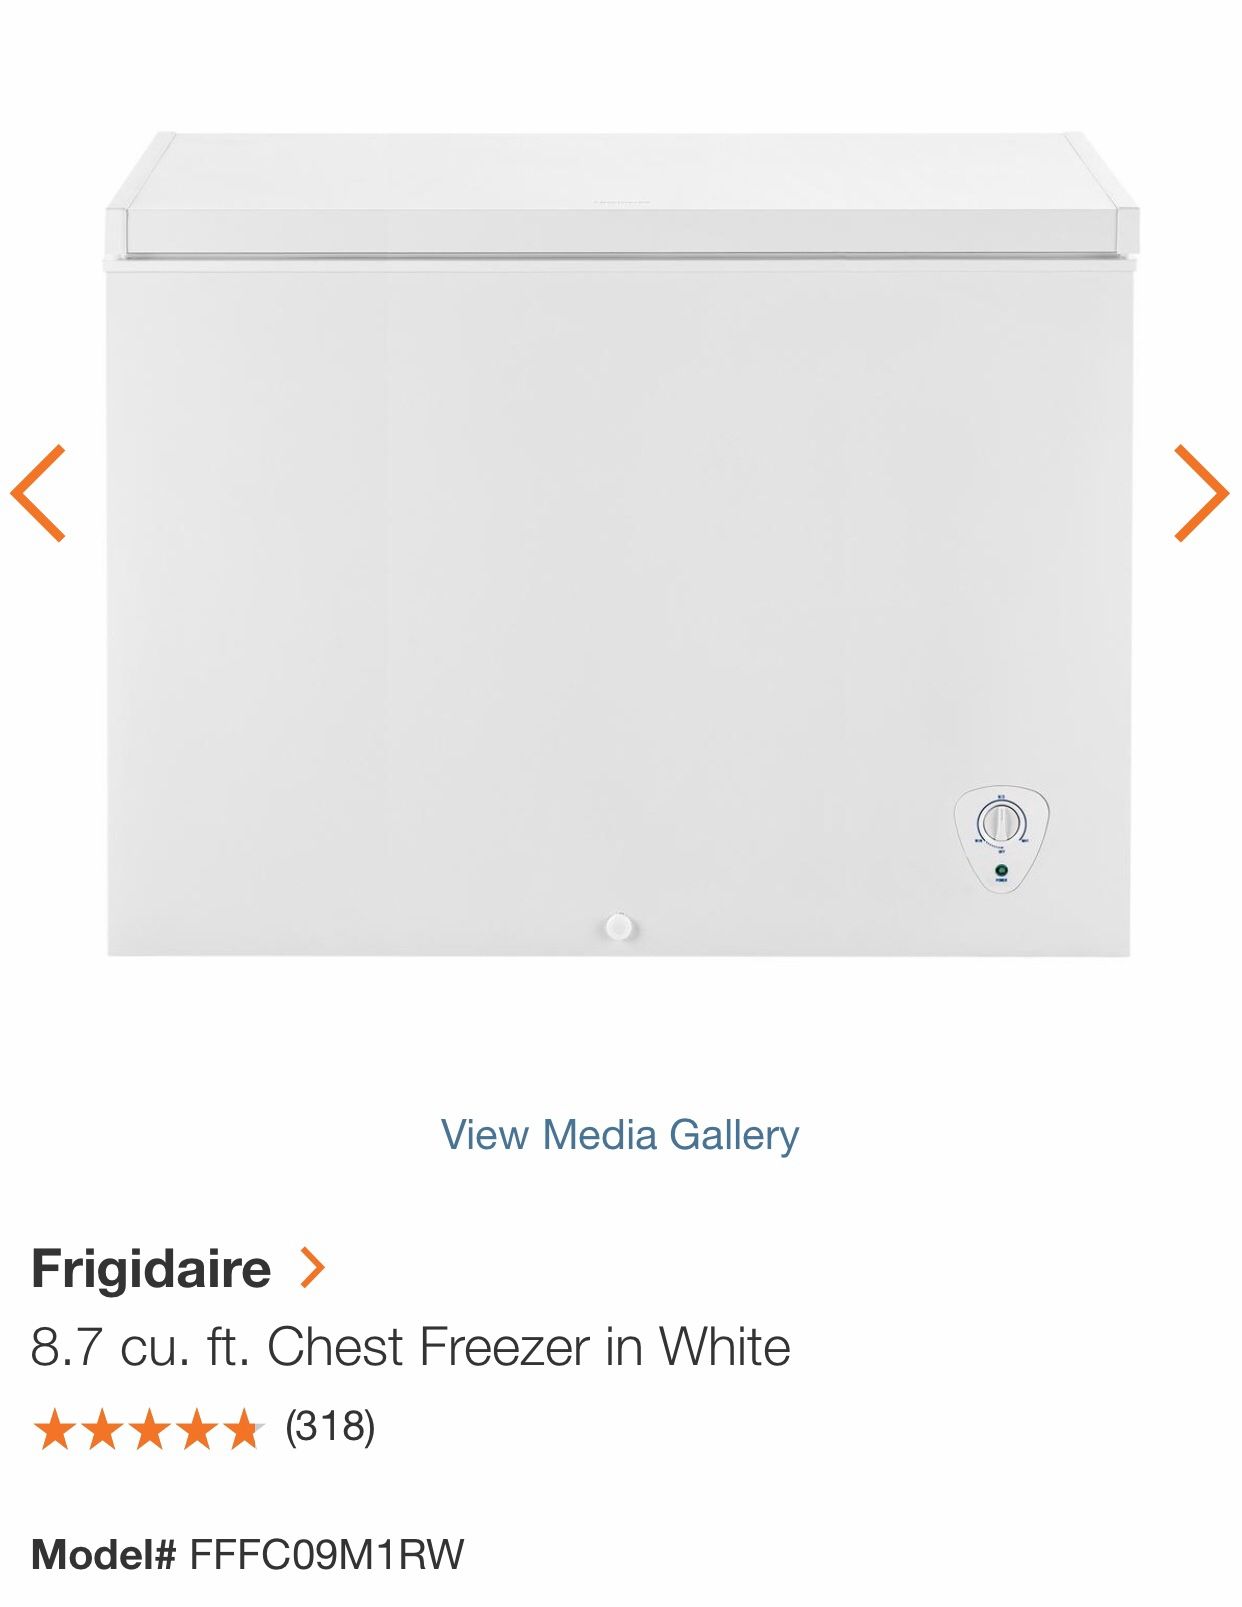 New in box - Frigidaire Large 8.7 Chest Freezer - Retail $399